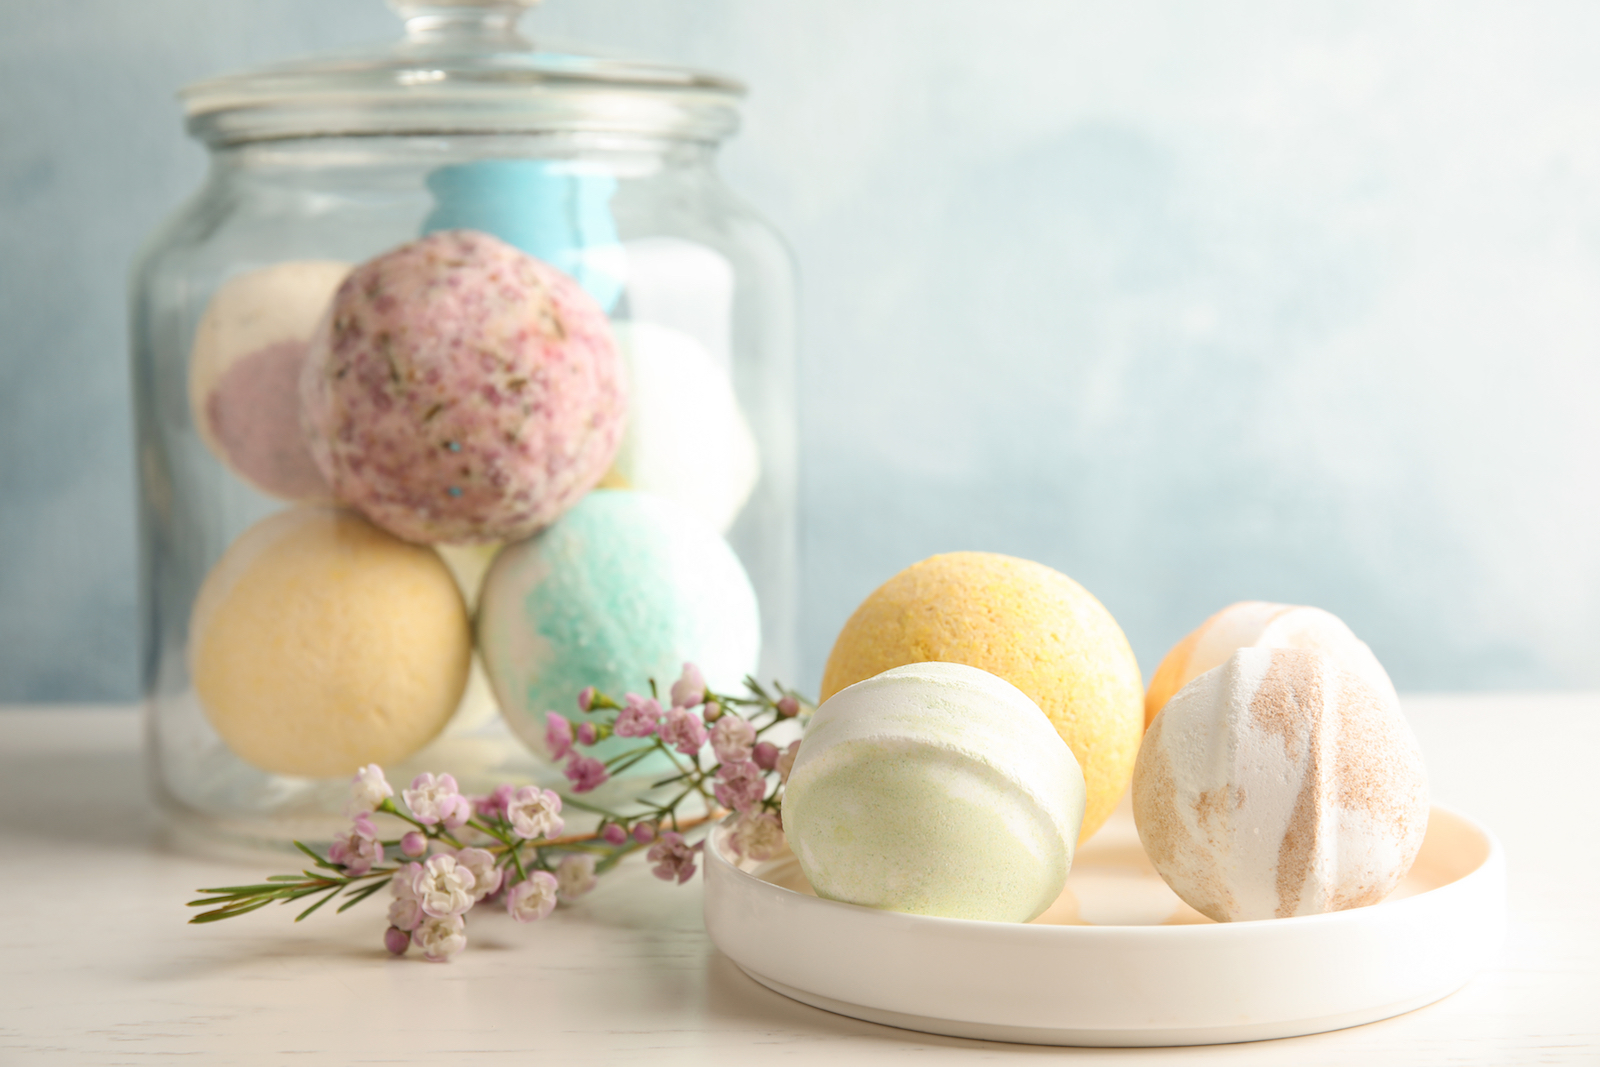 How to Make Bath Bombs - frostedBLOG DIY and Craft Ideas 